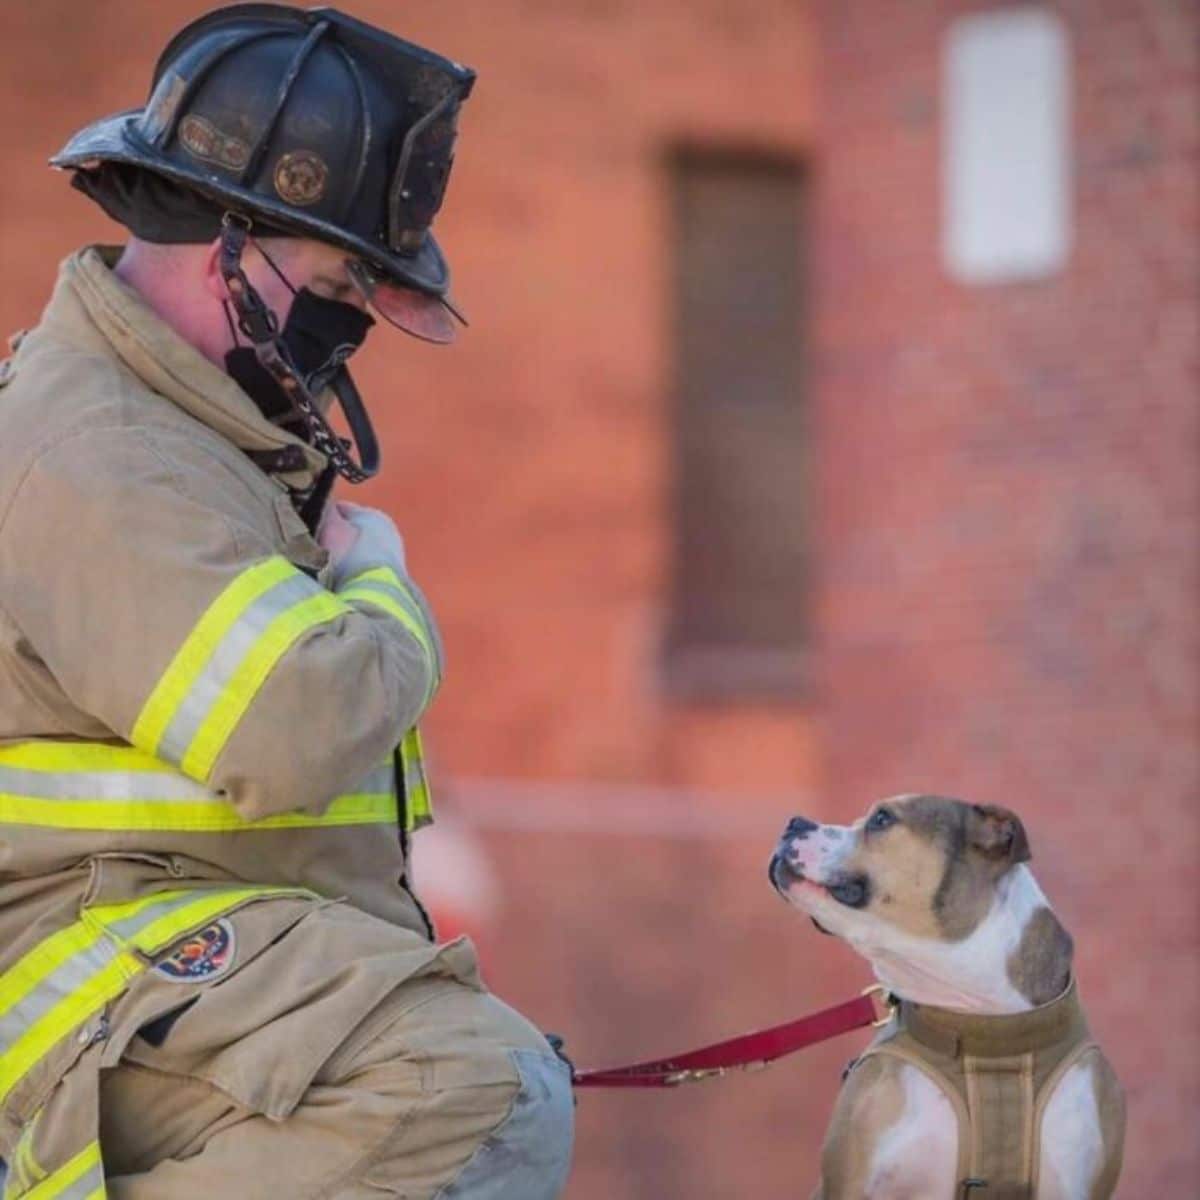 brown and white pit bull wearing a brown harness and red leash next to a male firefighter